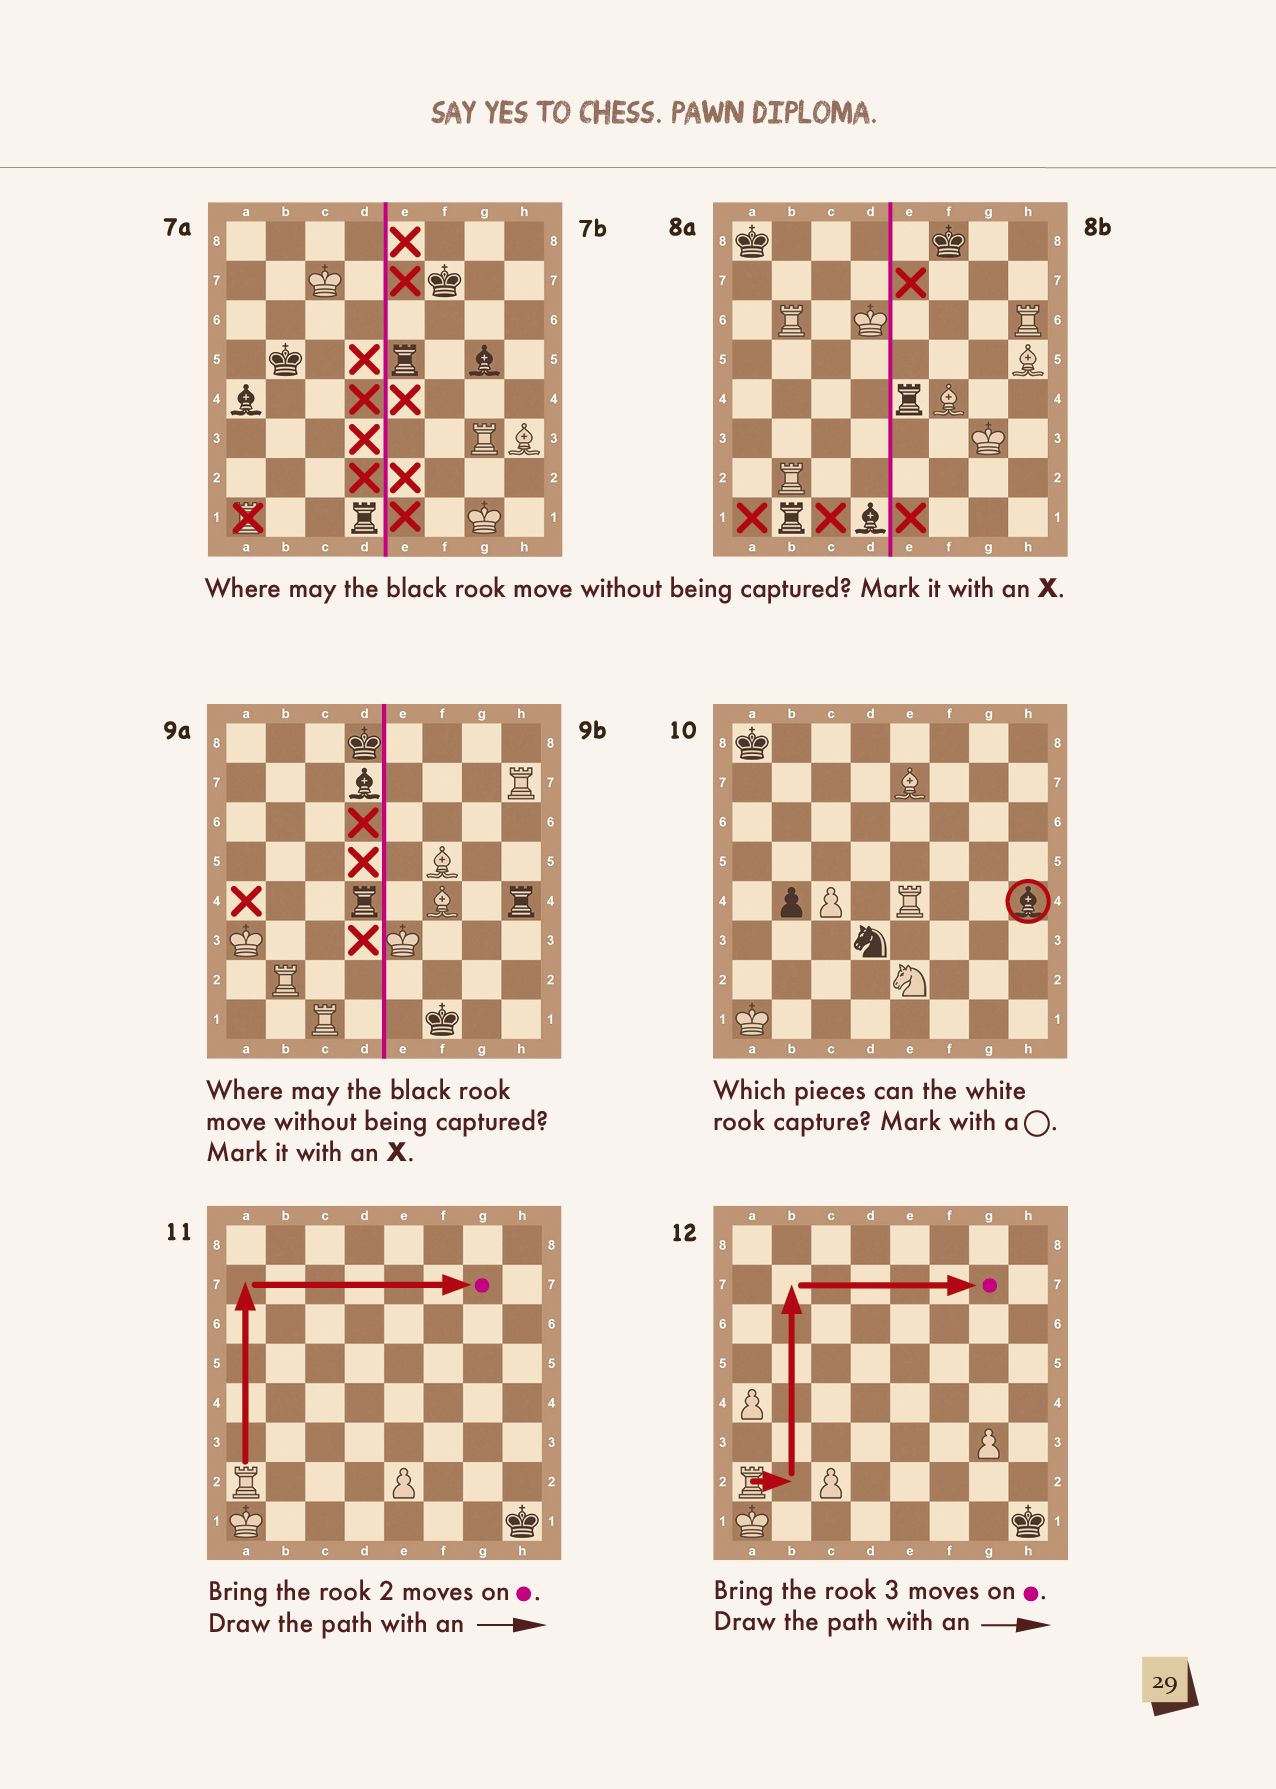 sayyes2chess_solutions_page_29.jpg